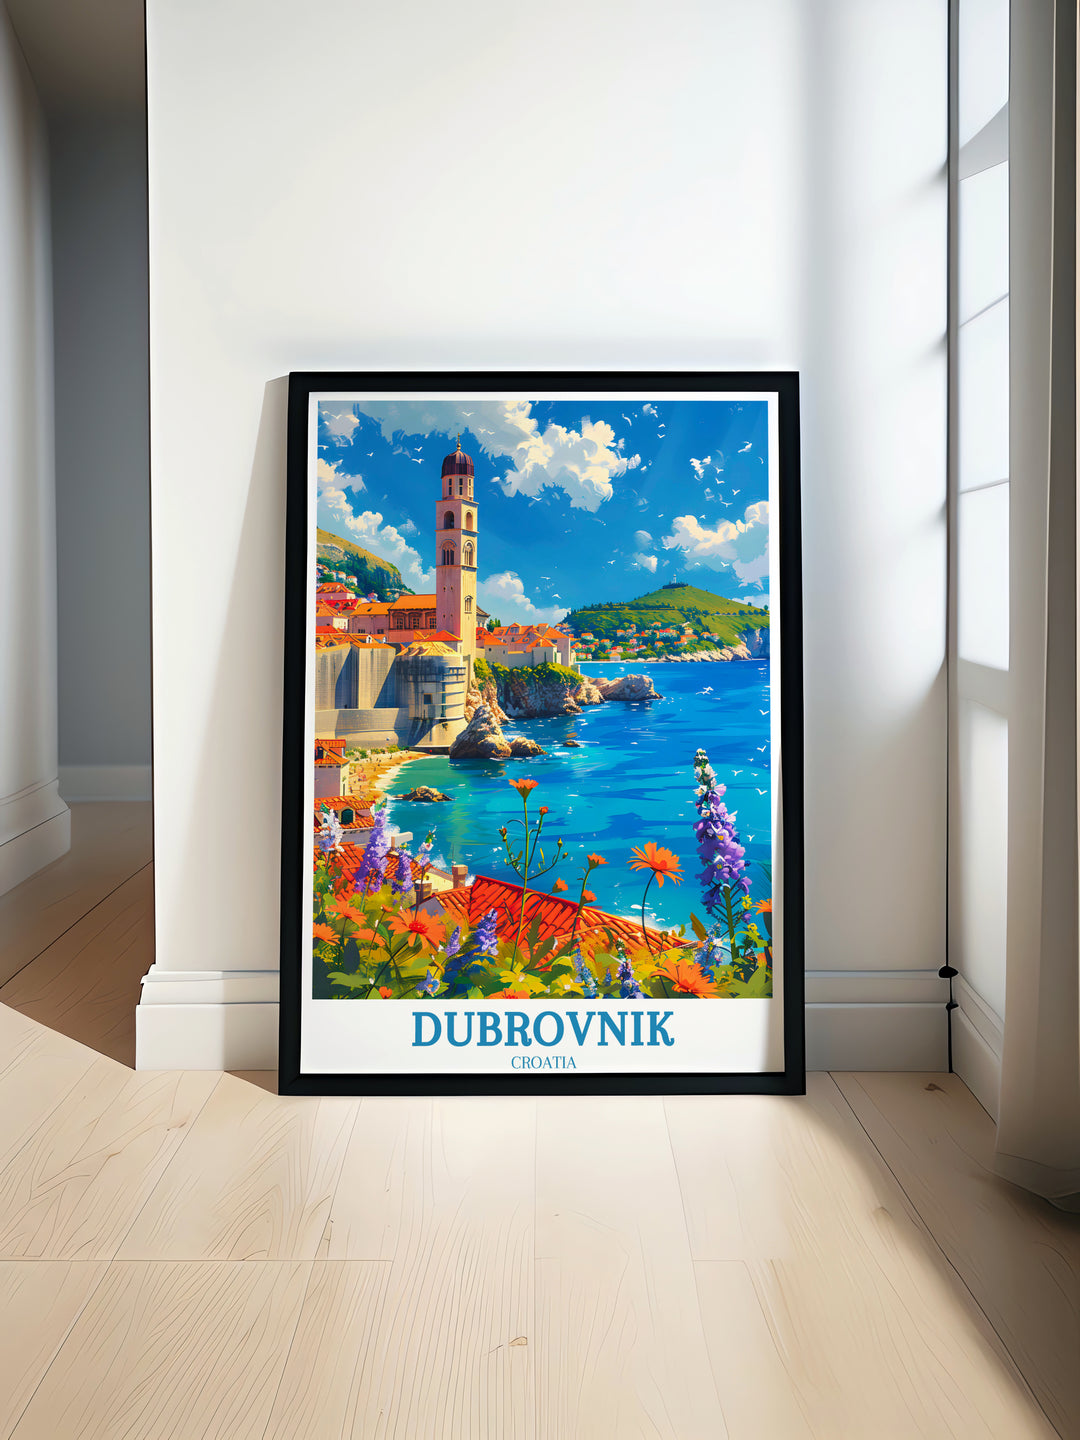 Adorn your walls with Dubrovnik's beauty. Explore its historic landmarks through captivating wall art